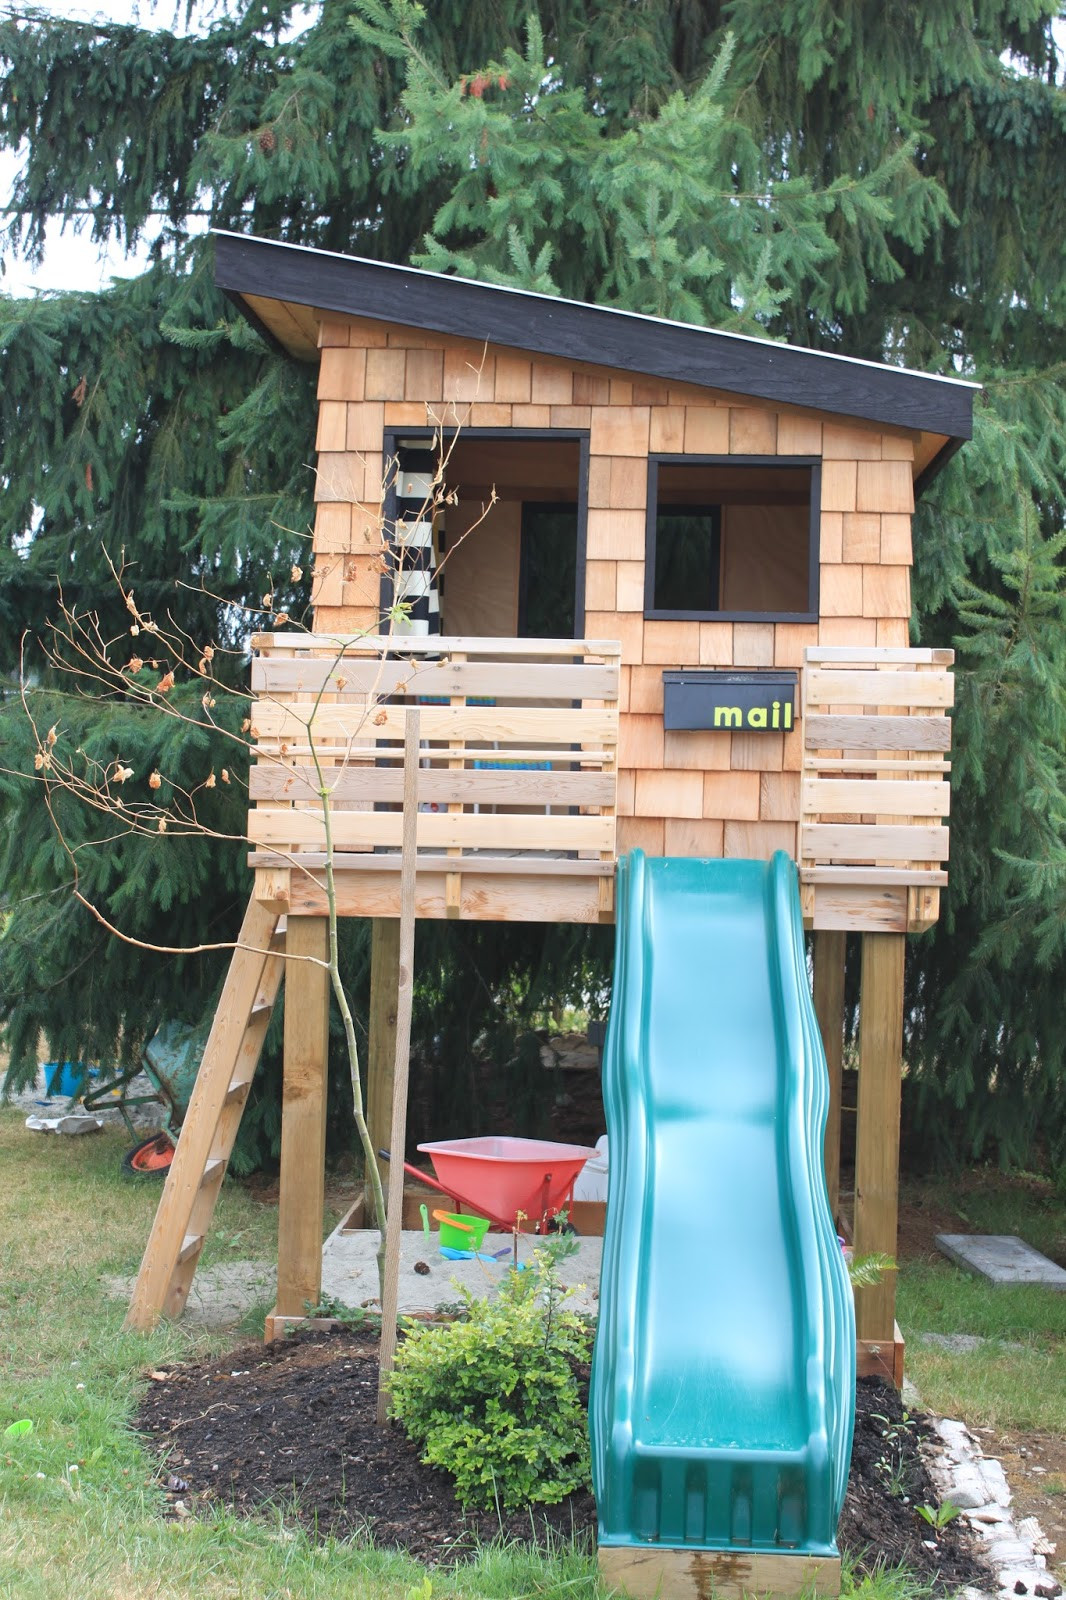 Outdoor Playhouse For Kids
 15 Pimped Out Playhouses Your Kids Need In The Backyard